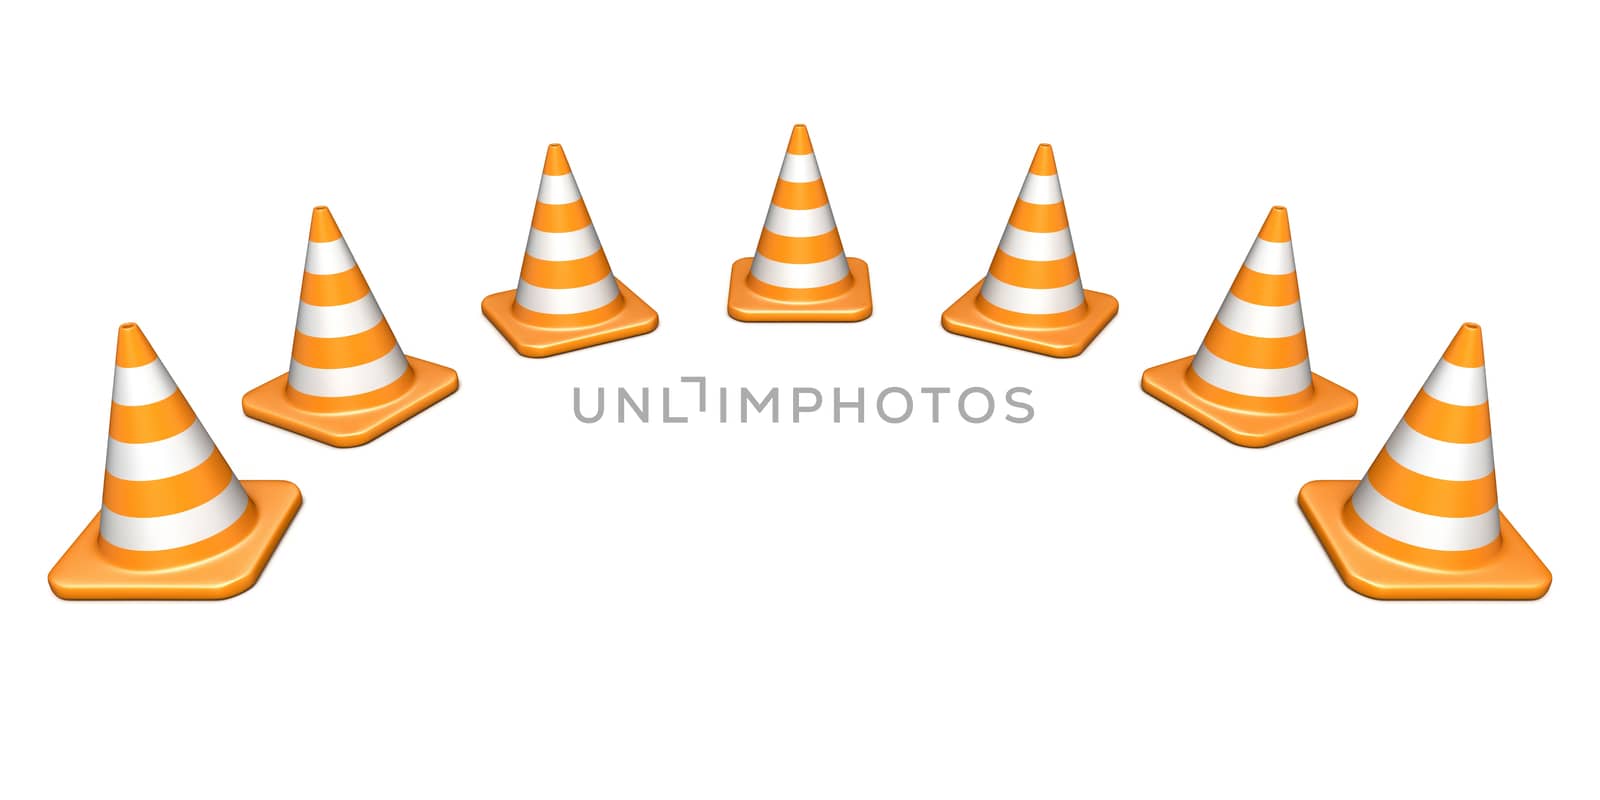 Traffic cones shaped arc 3D render illustration isolated on white background